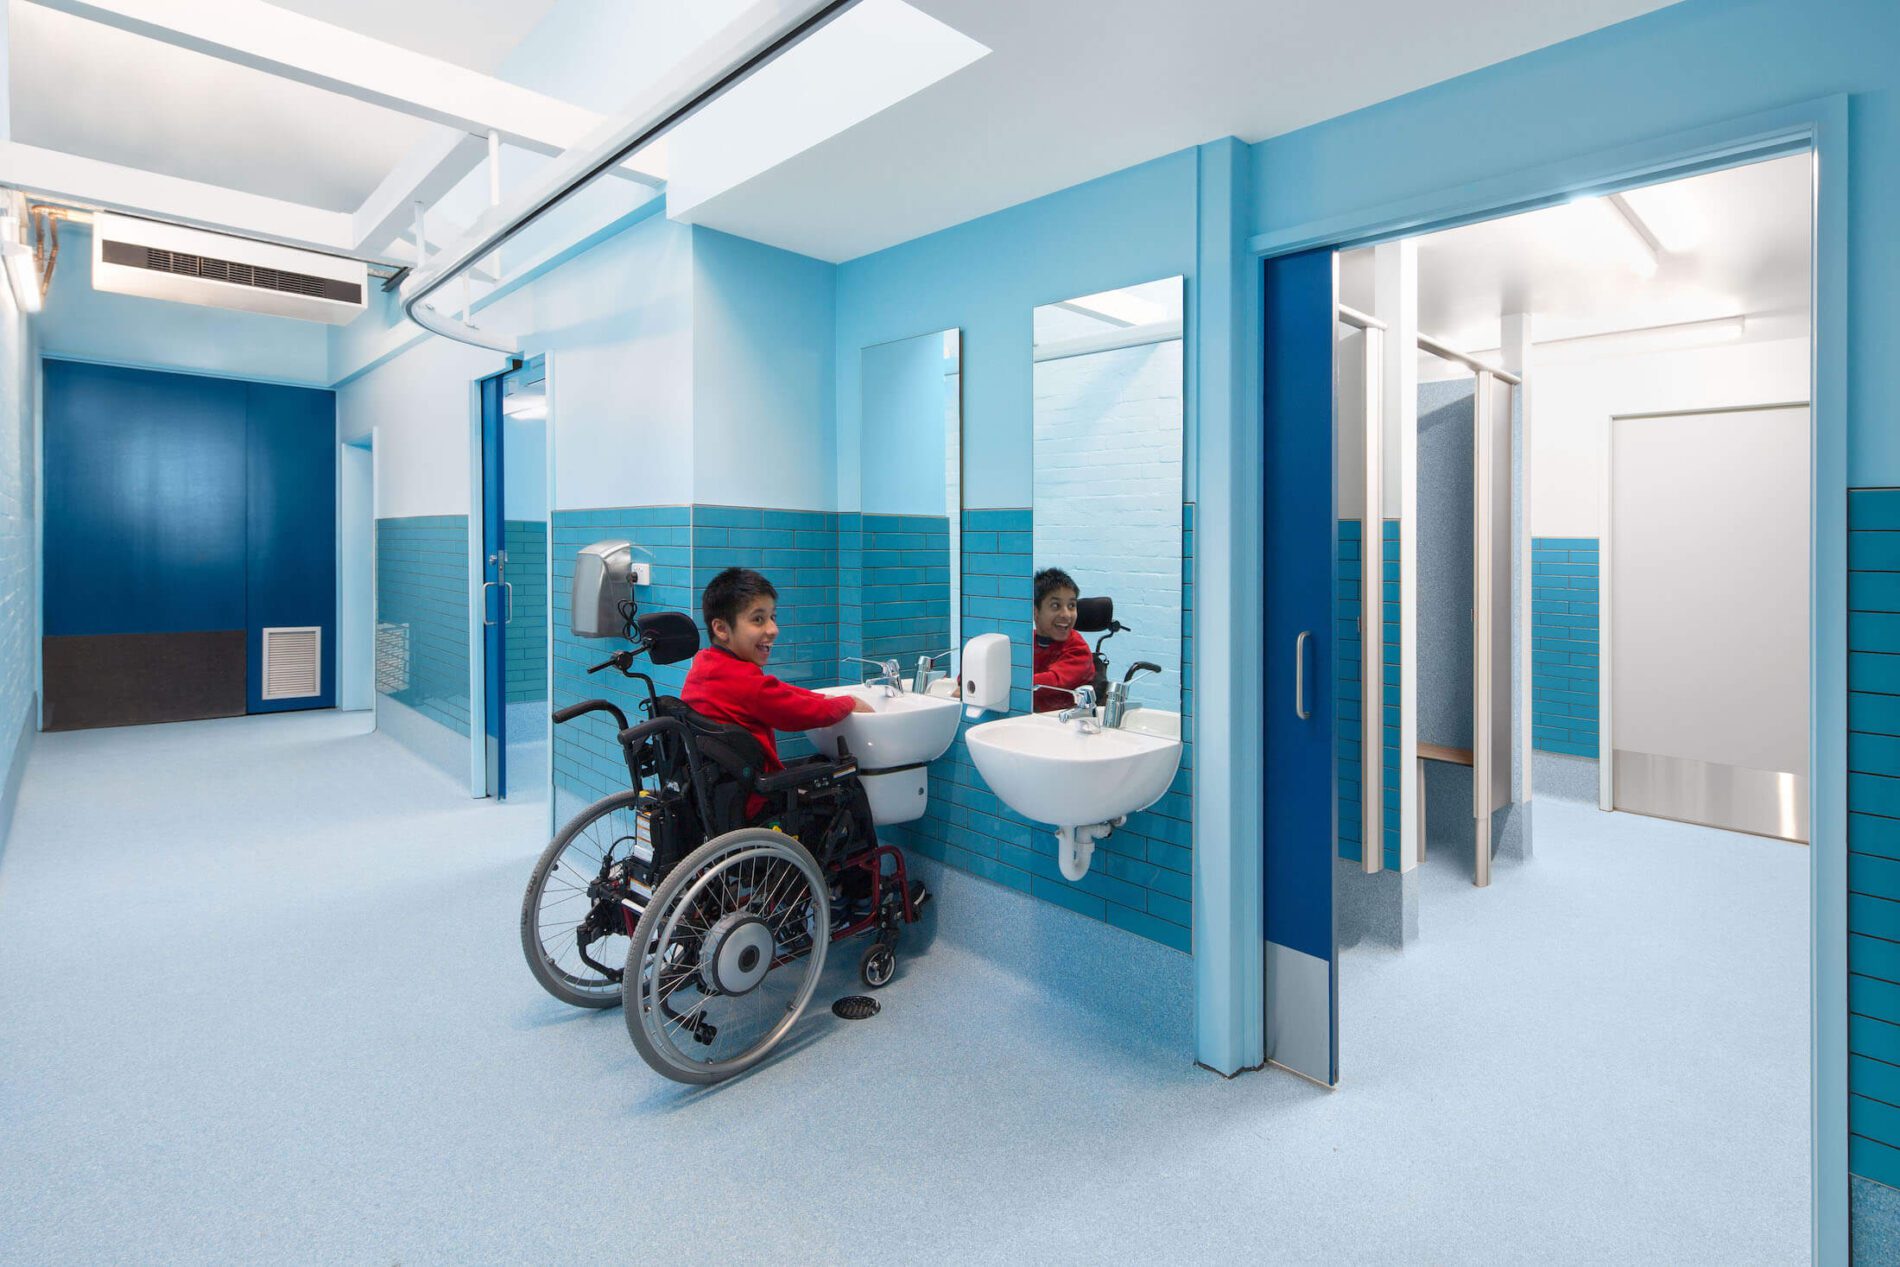 Student in wheelchair uses basin in blue toilet block, smiles at camera